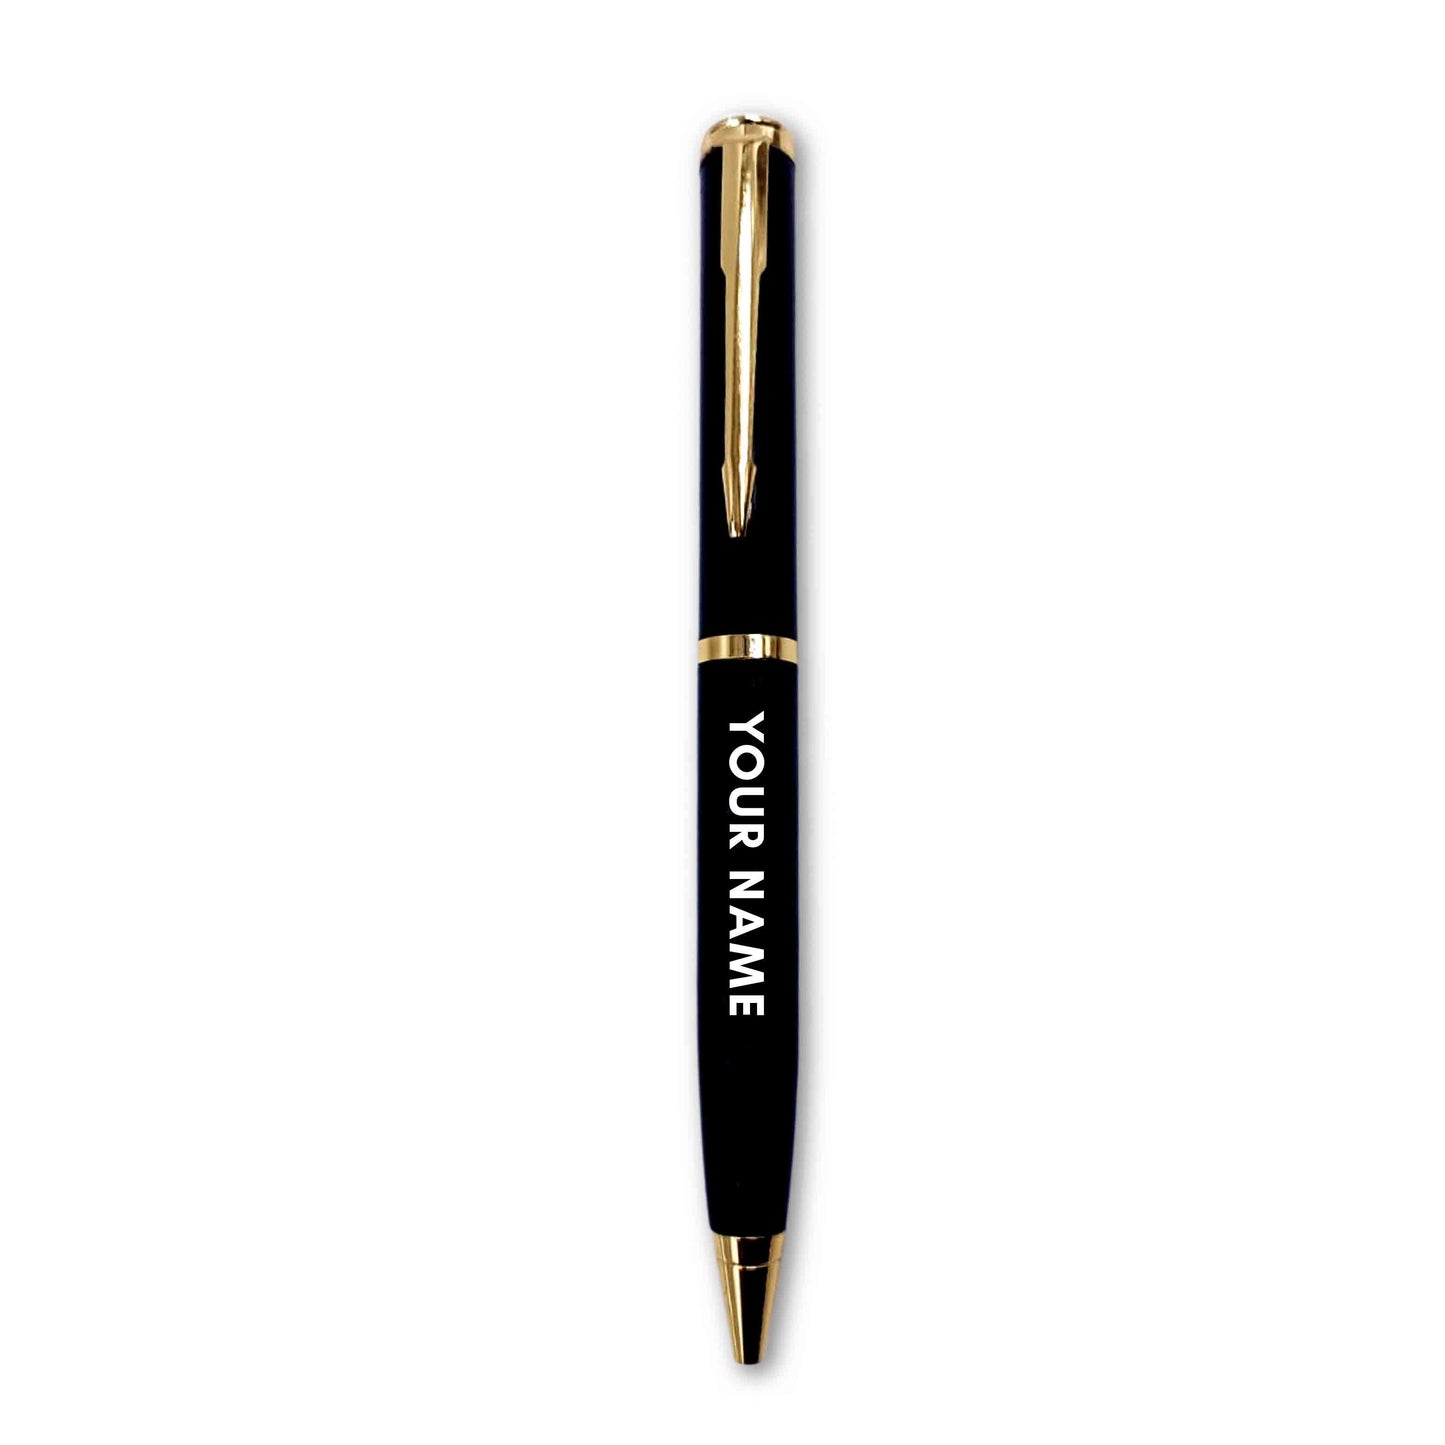 Customized Pen With Name Engraved for School Collage Friends (Black) - Your Name